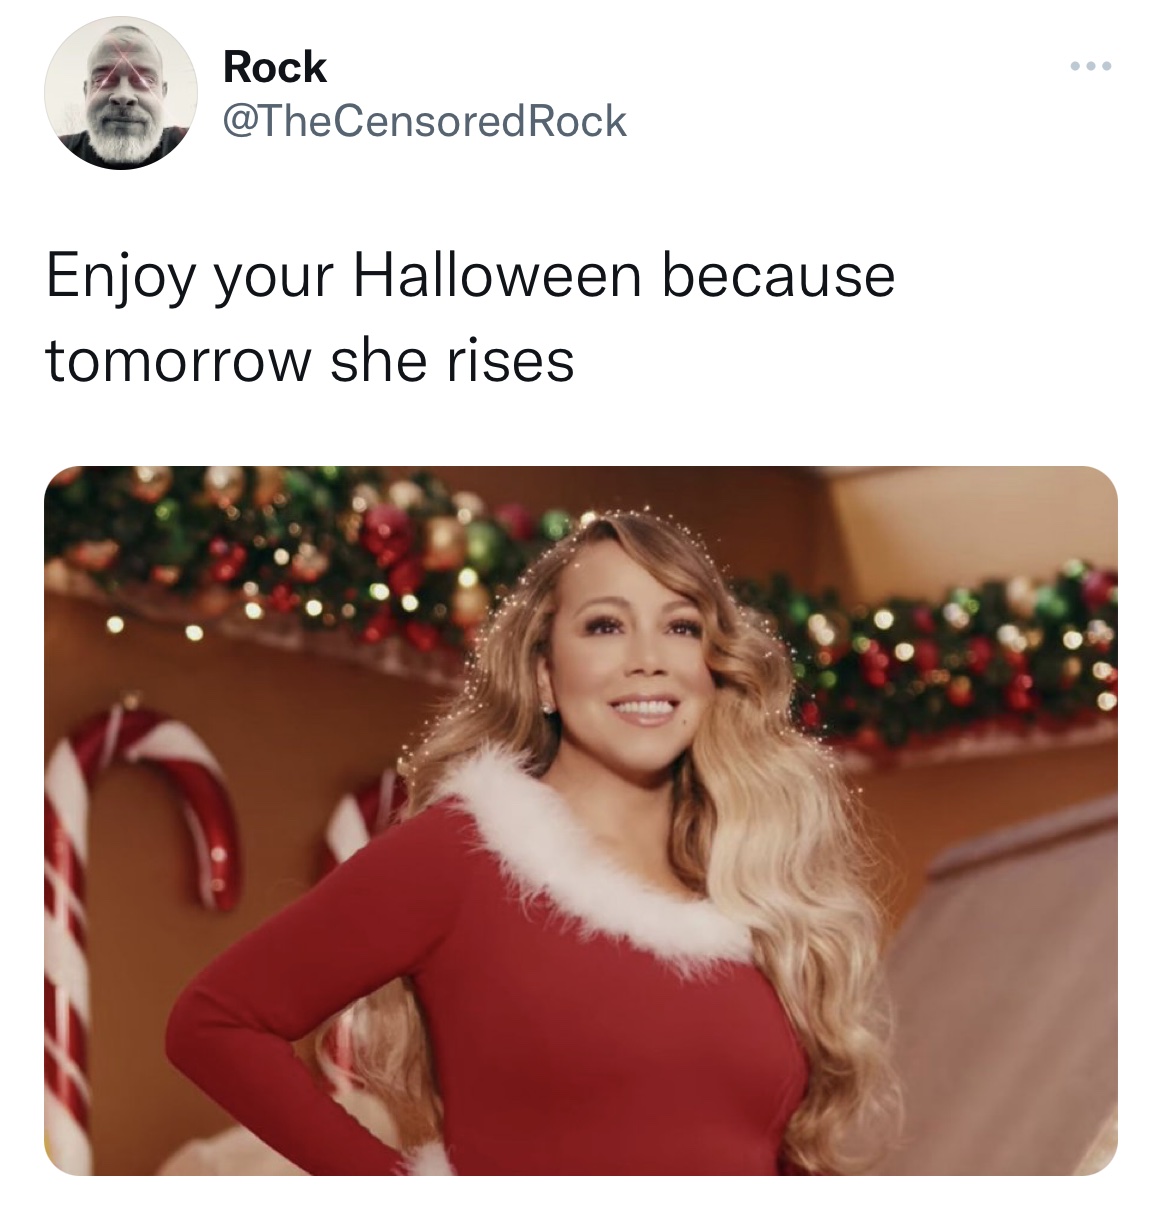 Tweets roasting celebs - mariah carey all i want for christmas - Rock Rock Enjoy your Halloween because tomorrow she rises